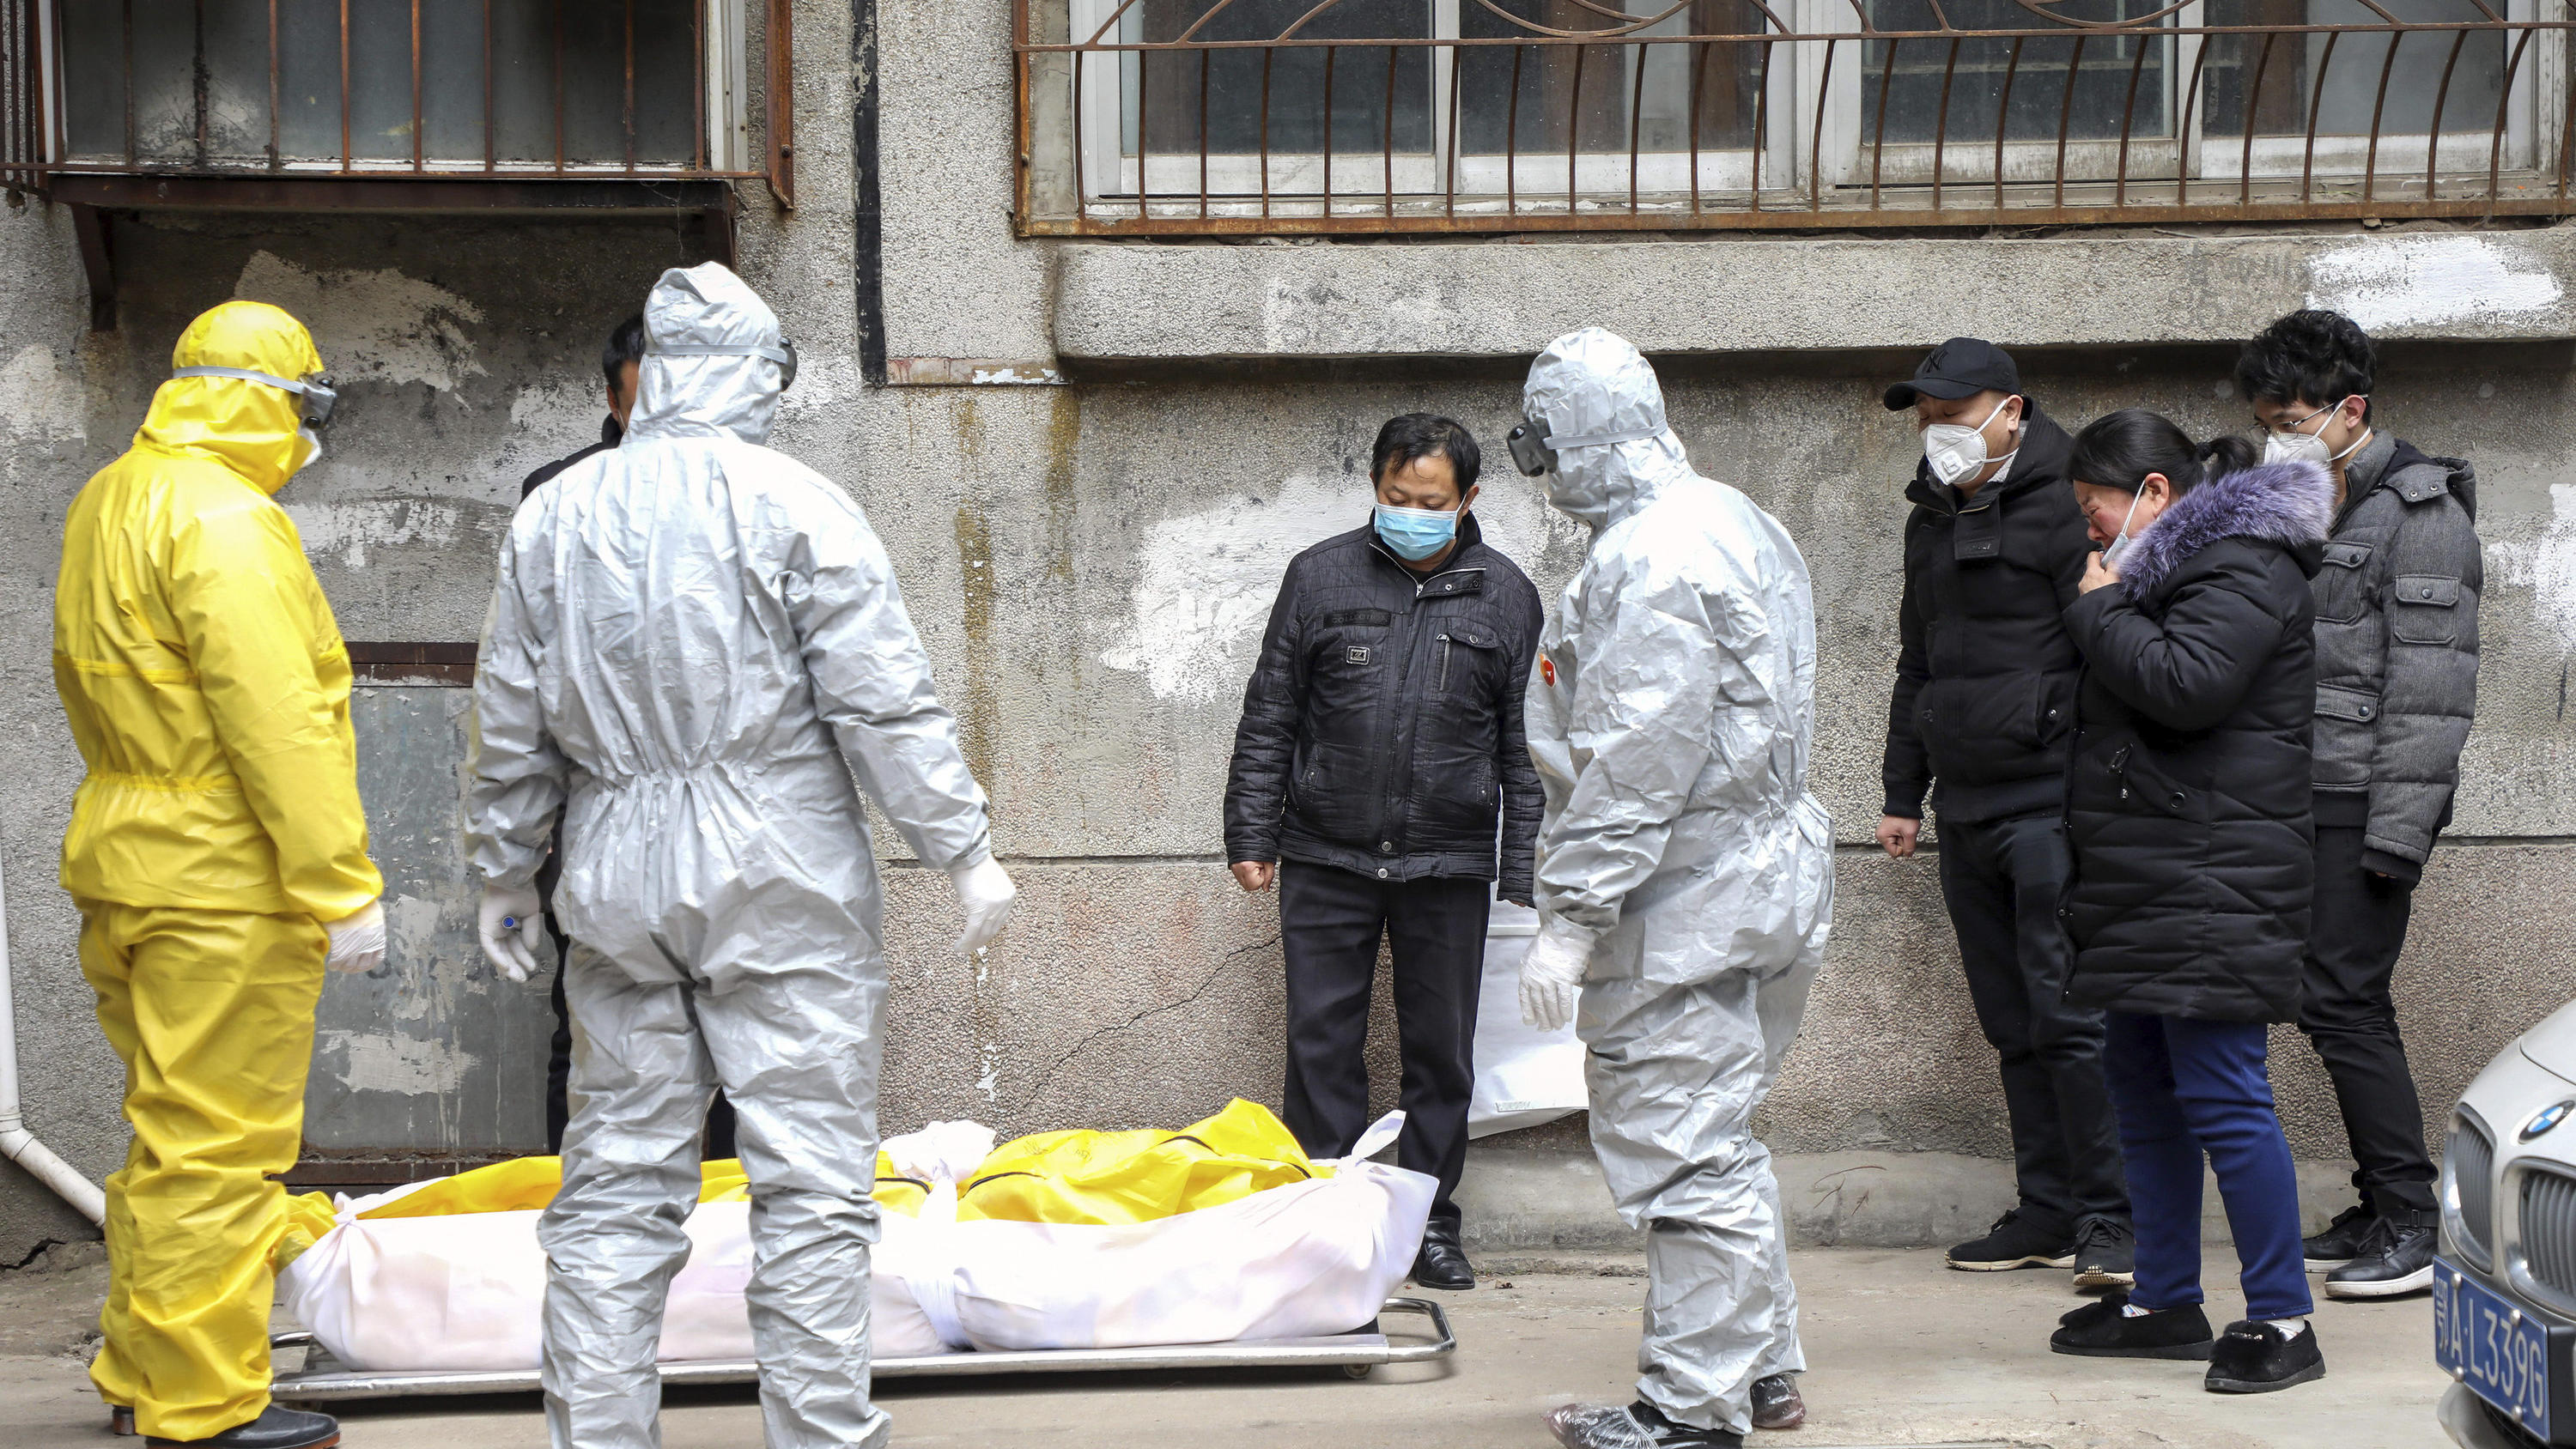 FILE - In this Feb. 1, 2020, file photo, funeral home workers remove the body of a person suspected to have died from the coronavirus outbreak from a residential building in Wuhan in central China's Hubei Province. The central Chinese city of Wuhan h